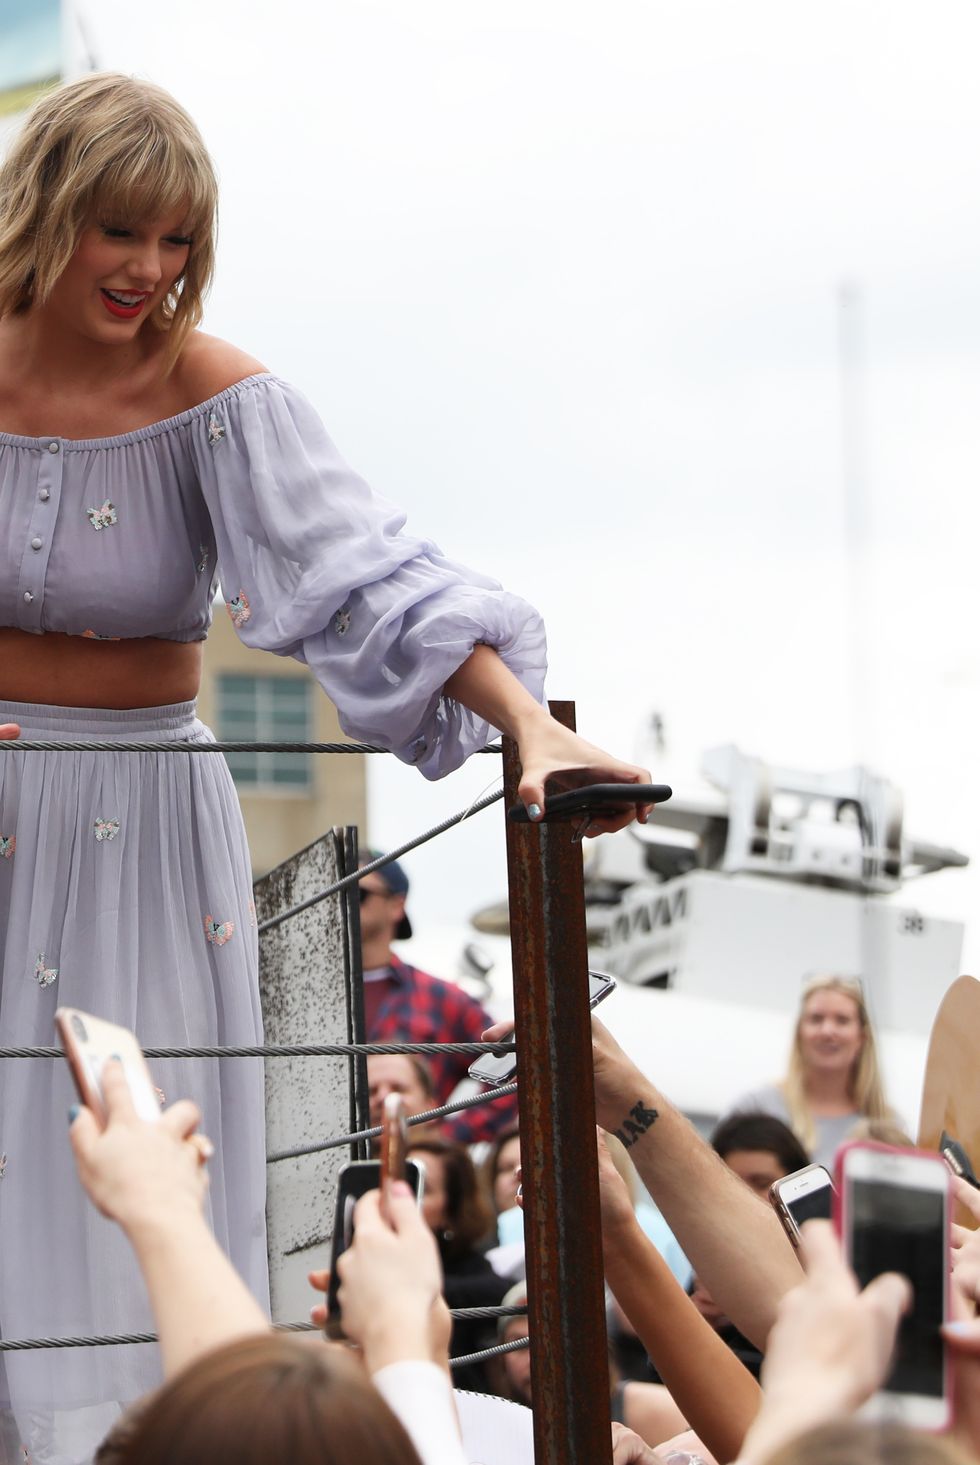 Taylor Swift Looks Like She's Ready for Her Sporty Era in Her Most Casual  'Fit Ever